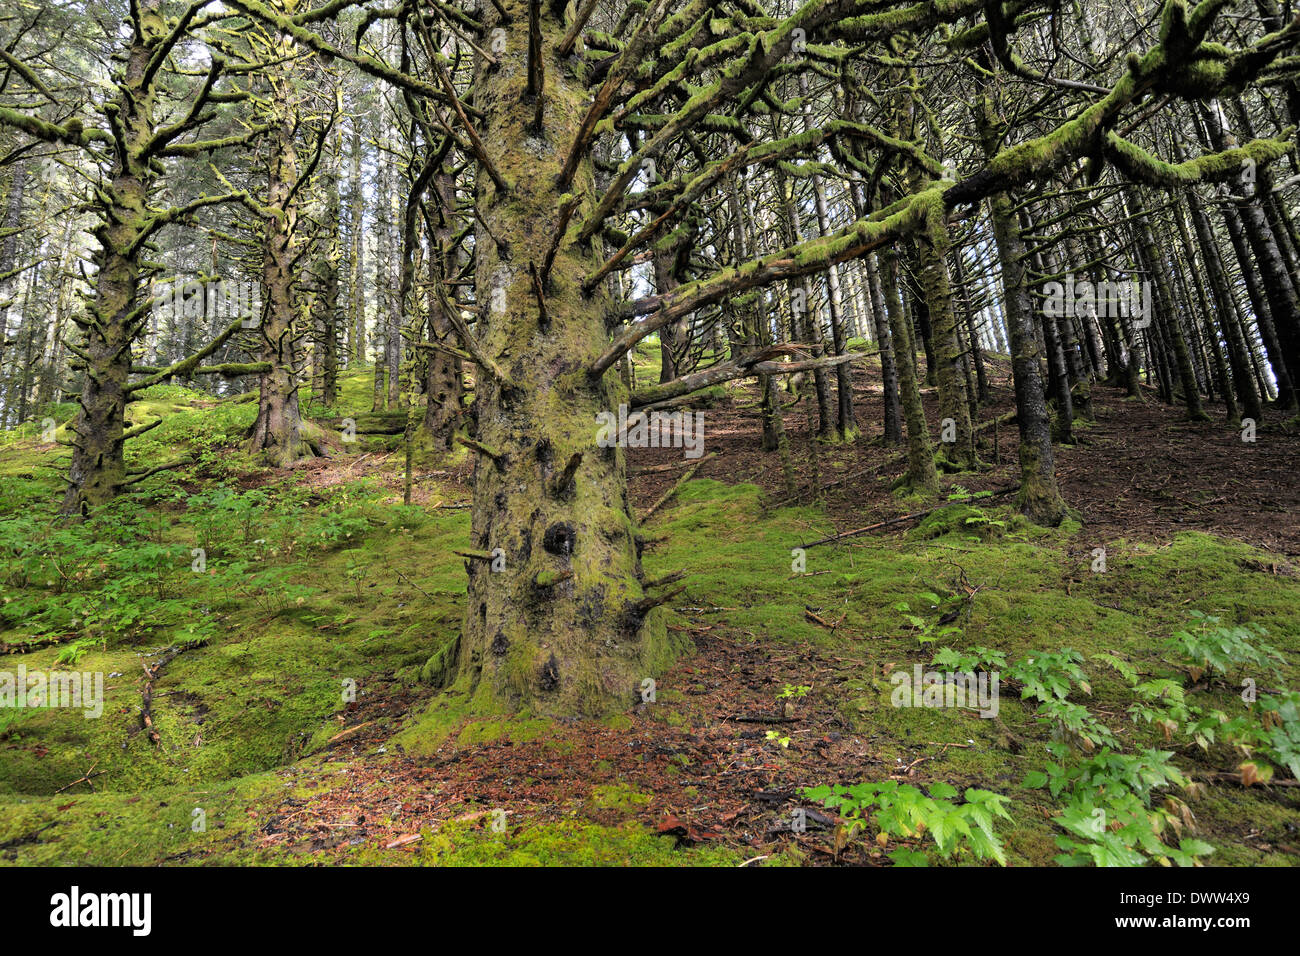 Trees in a pacific or northern rainforest at the Fort Abercombie National park on Kodiak island, Alaska, USA. Stock Photo